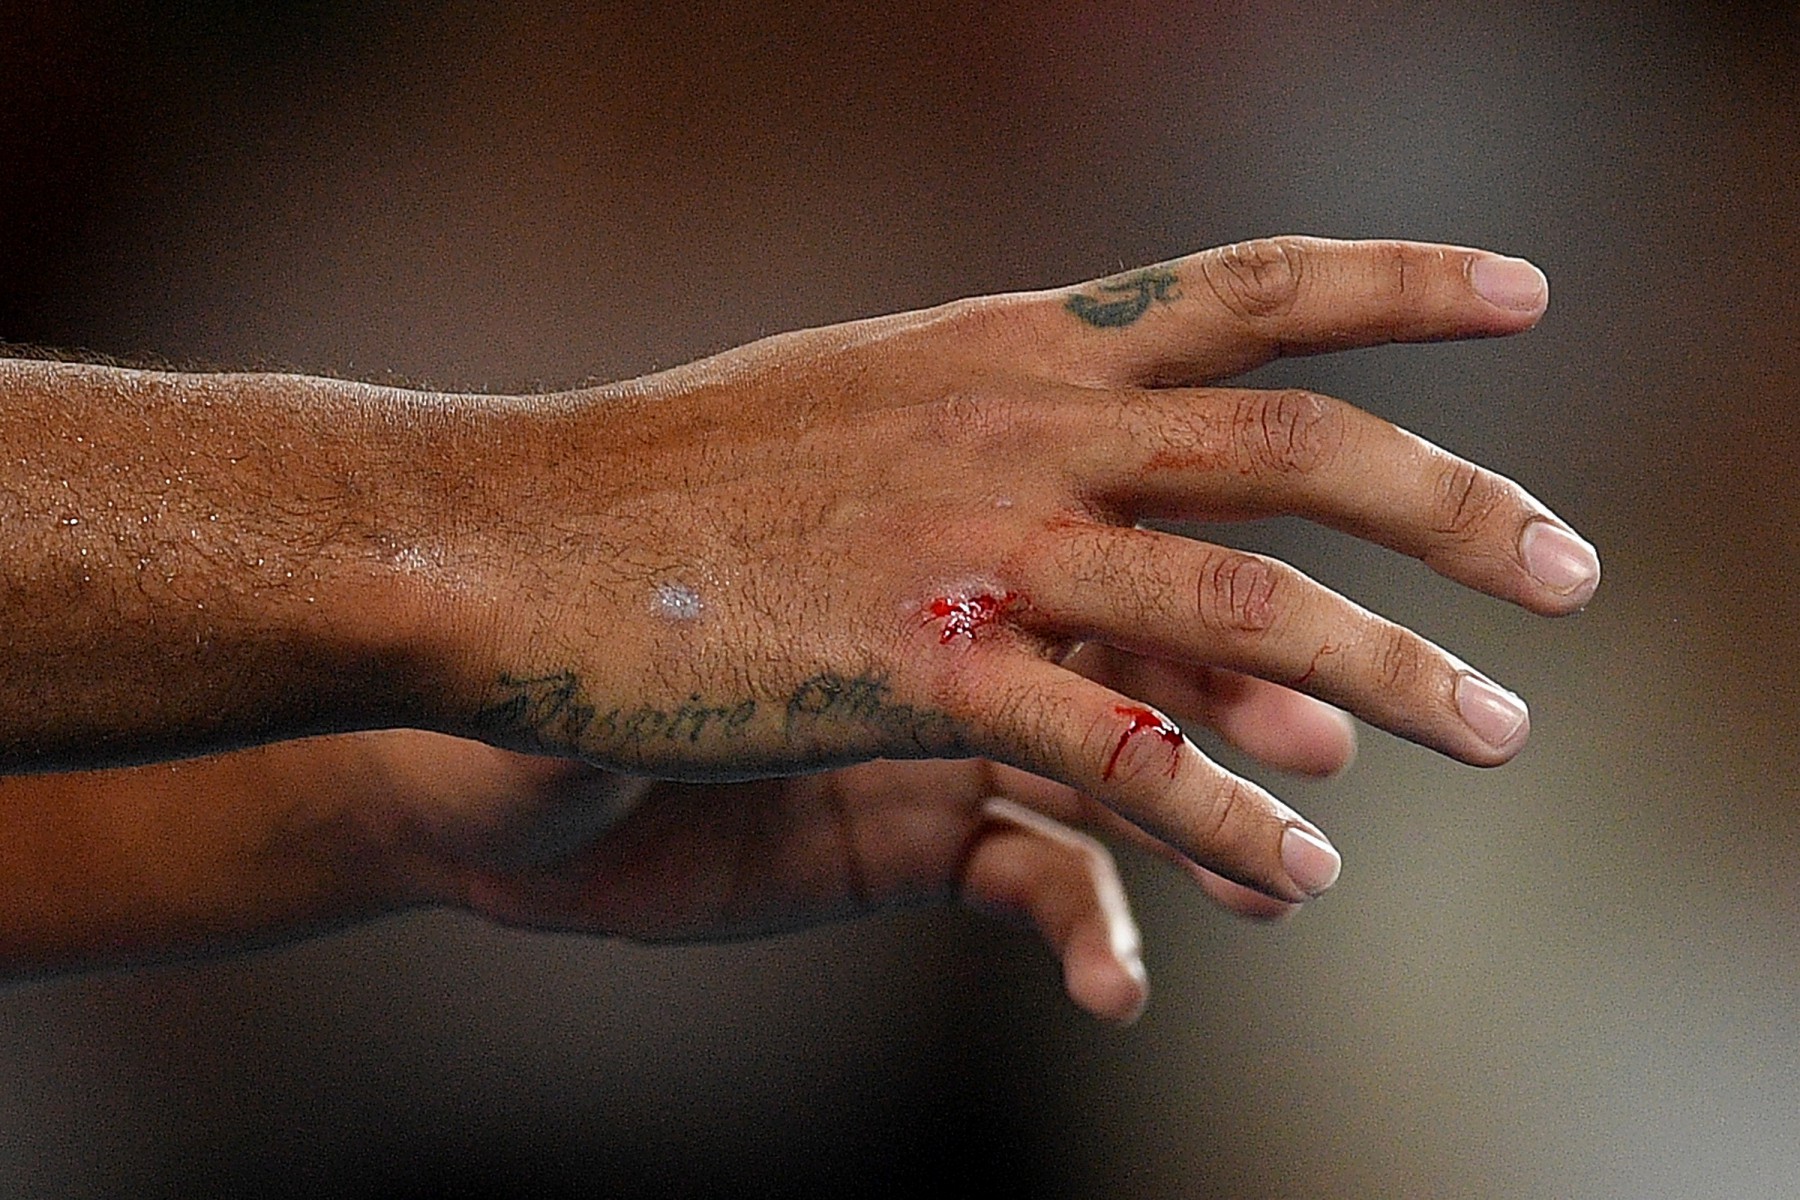 Kyrgios took his fair share of tumbles across the court in Melbourne, cutting open his hand